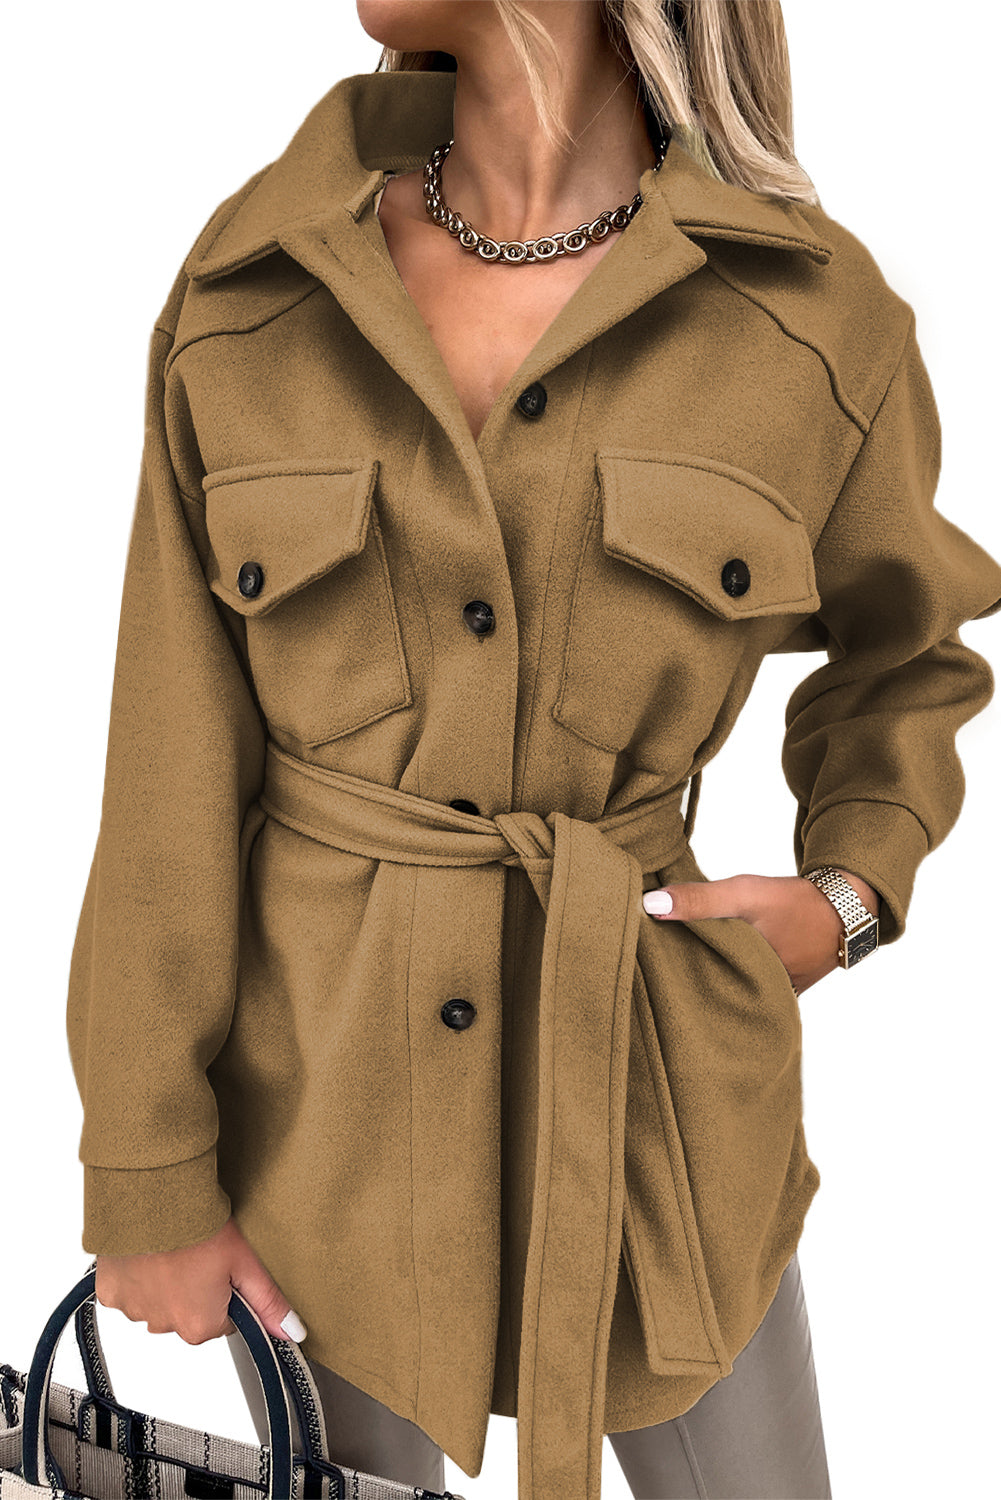 Khaki Women's Lapel Button Down Coat Winter Belted Coat with Pockets LC8511359-1016